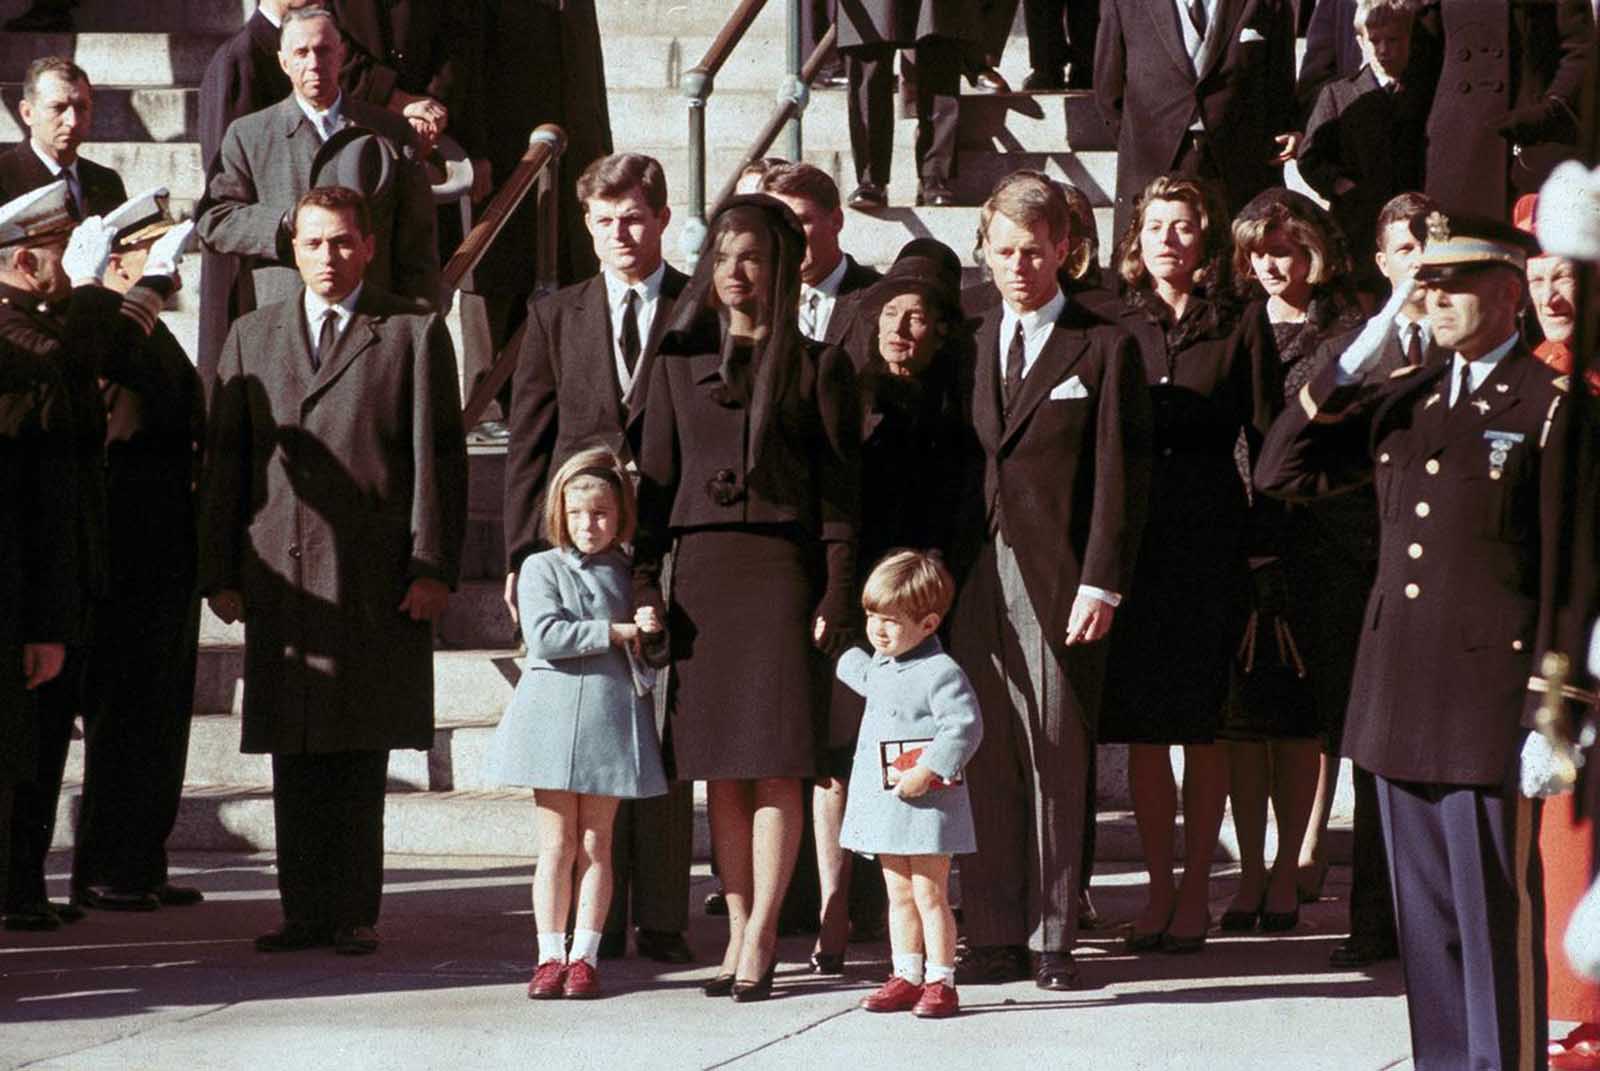 The First Family watches John F. Kennedy's funeral procession in Washington on November 25, 1963, three days after the president was assassinated in Dallas. Widow Jacqueline Kennedy, center, daughter Caroline Kennedy, left, and son John Jr., are accompanied by the late president's brothers Sen. Edward Kennedy, left, and Attorney General Robert Kennedy.